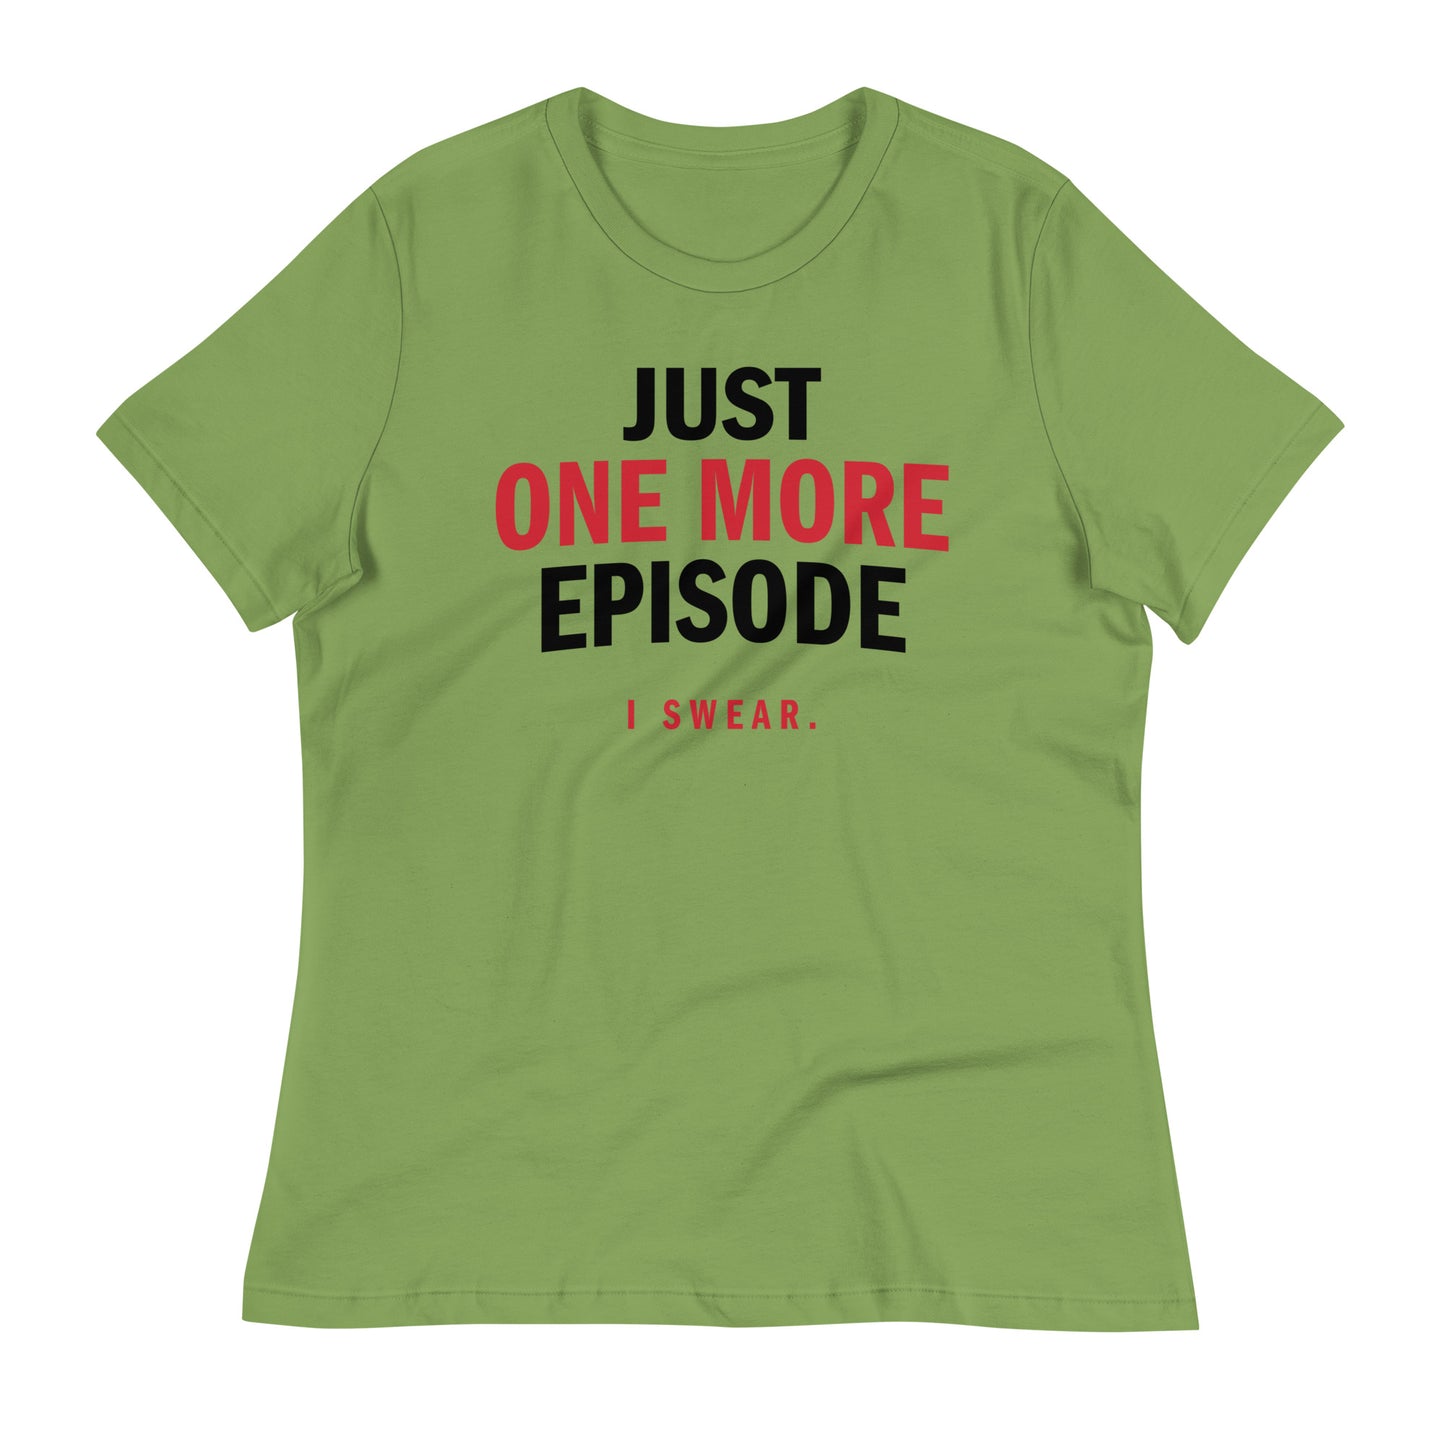 Just One More Episode Women's Signature Tee